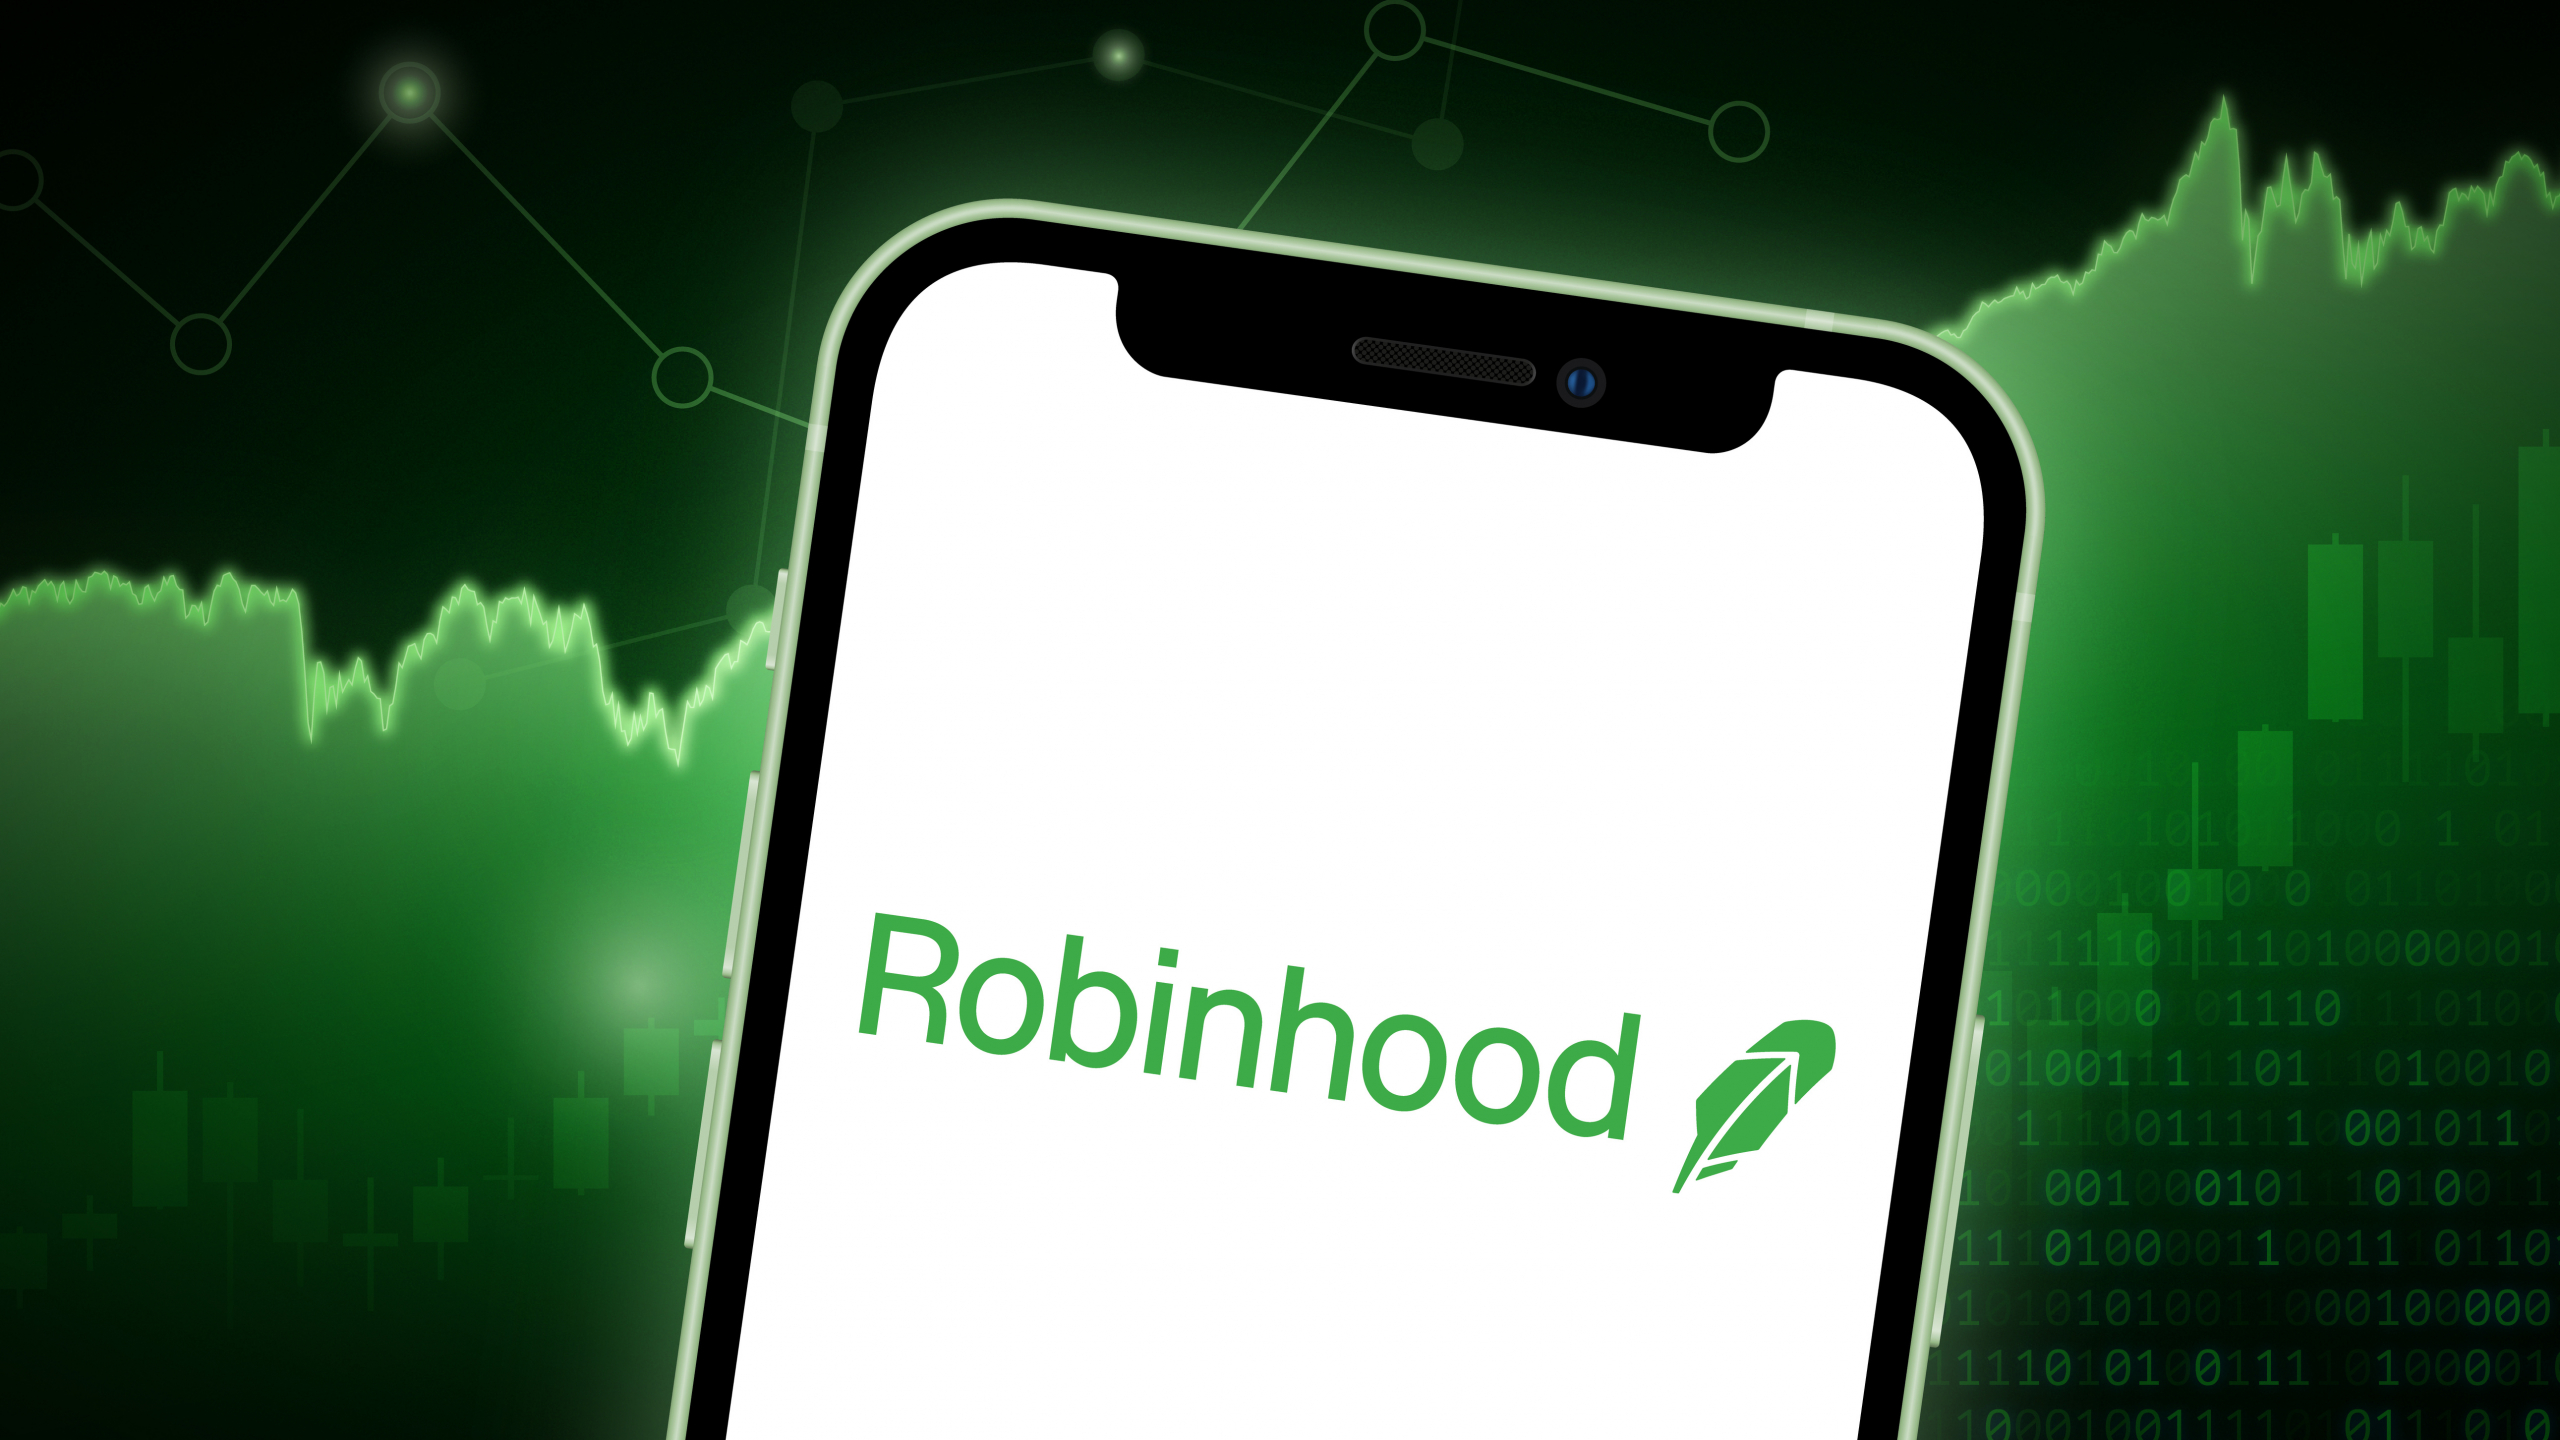 Robinhood shares rise by 30% after FTX founder buys large stake
